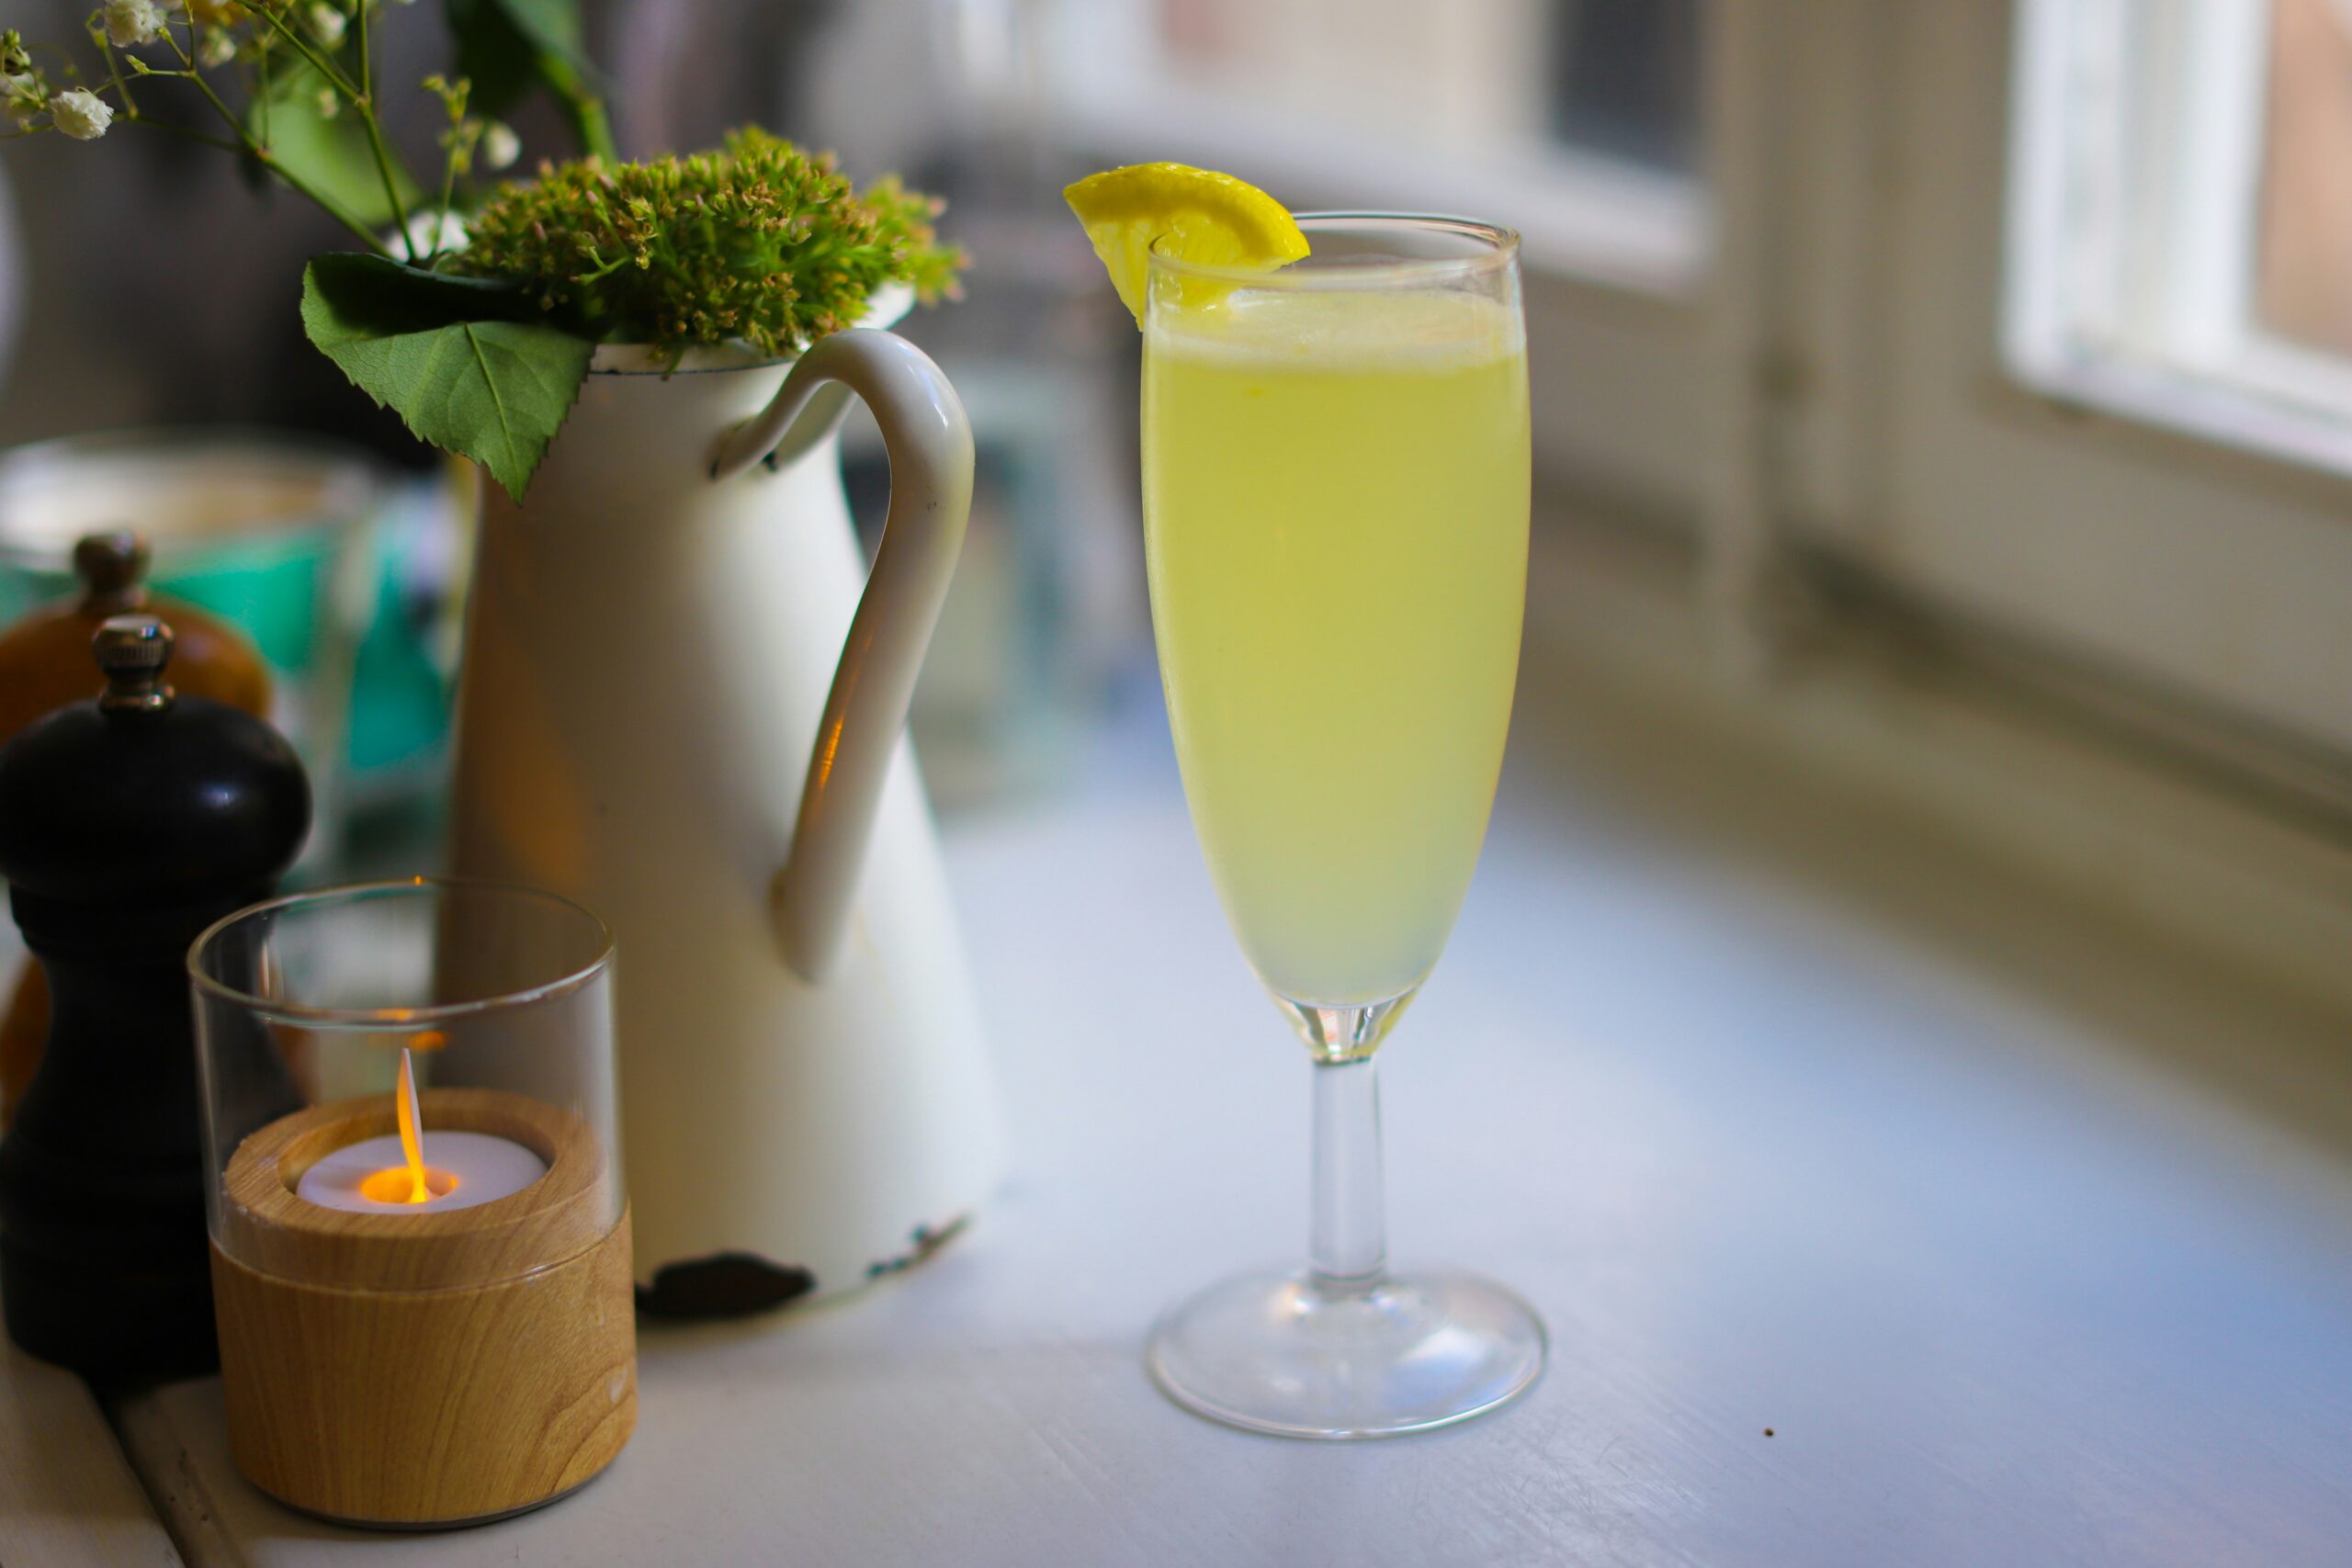 Wondering what to mix with gin? A French 75 is the perfect simple and easy cocktail. Pictured: A French 75 cocktail